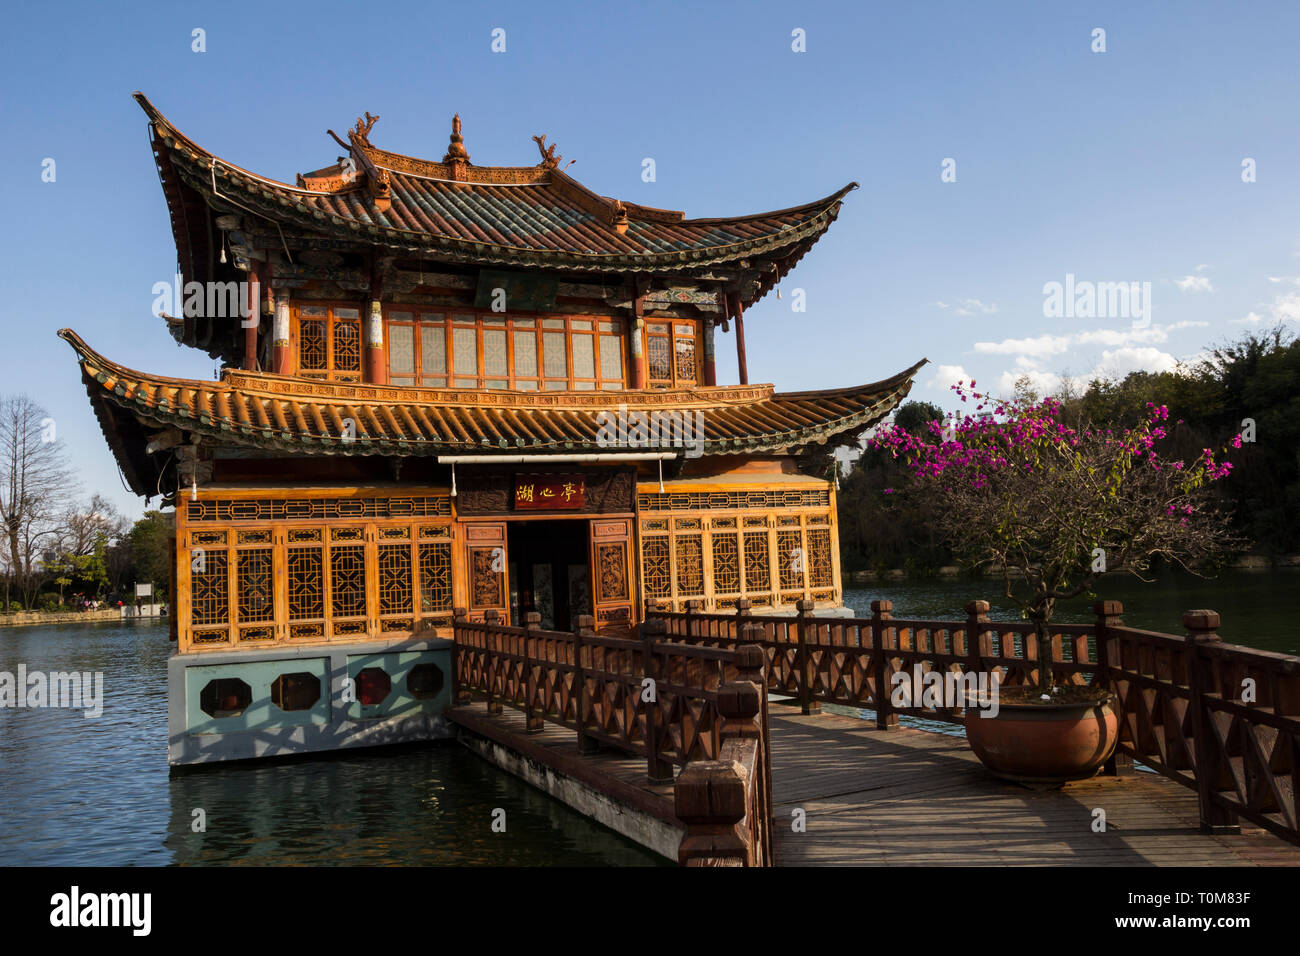 Traditional Chinese pavilion on a lake Stock Photo